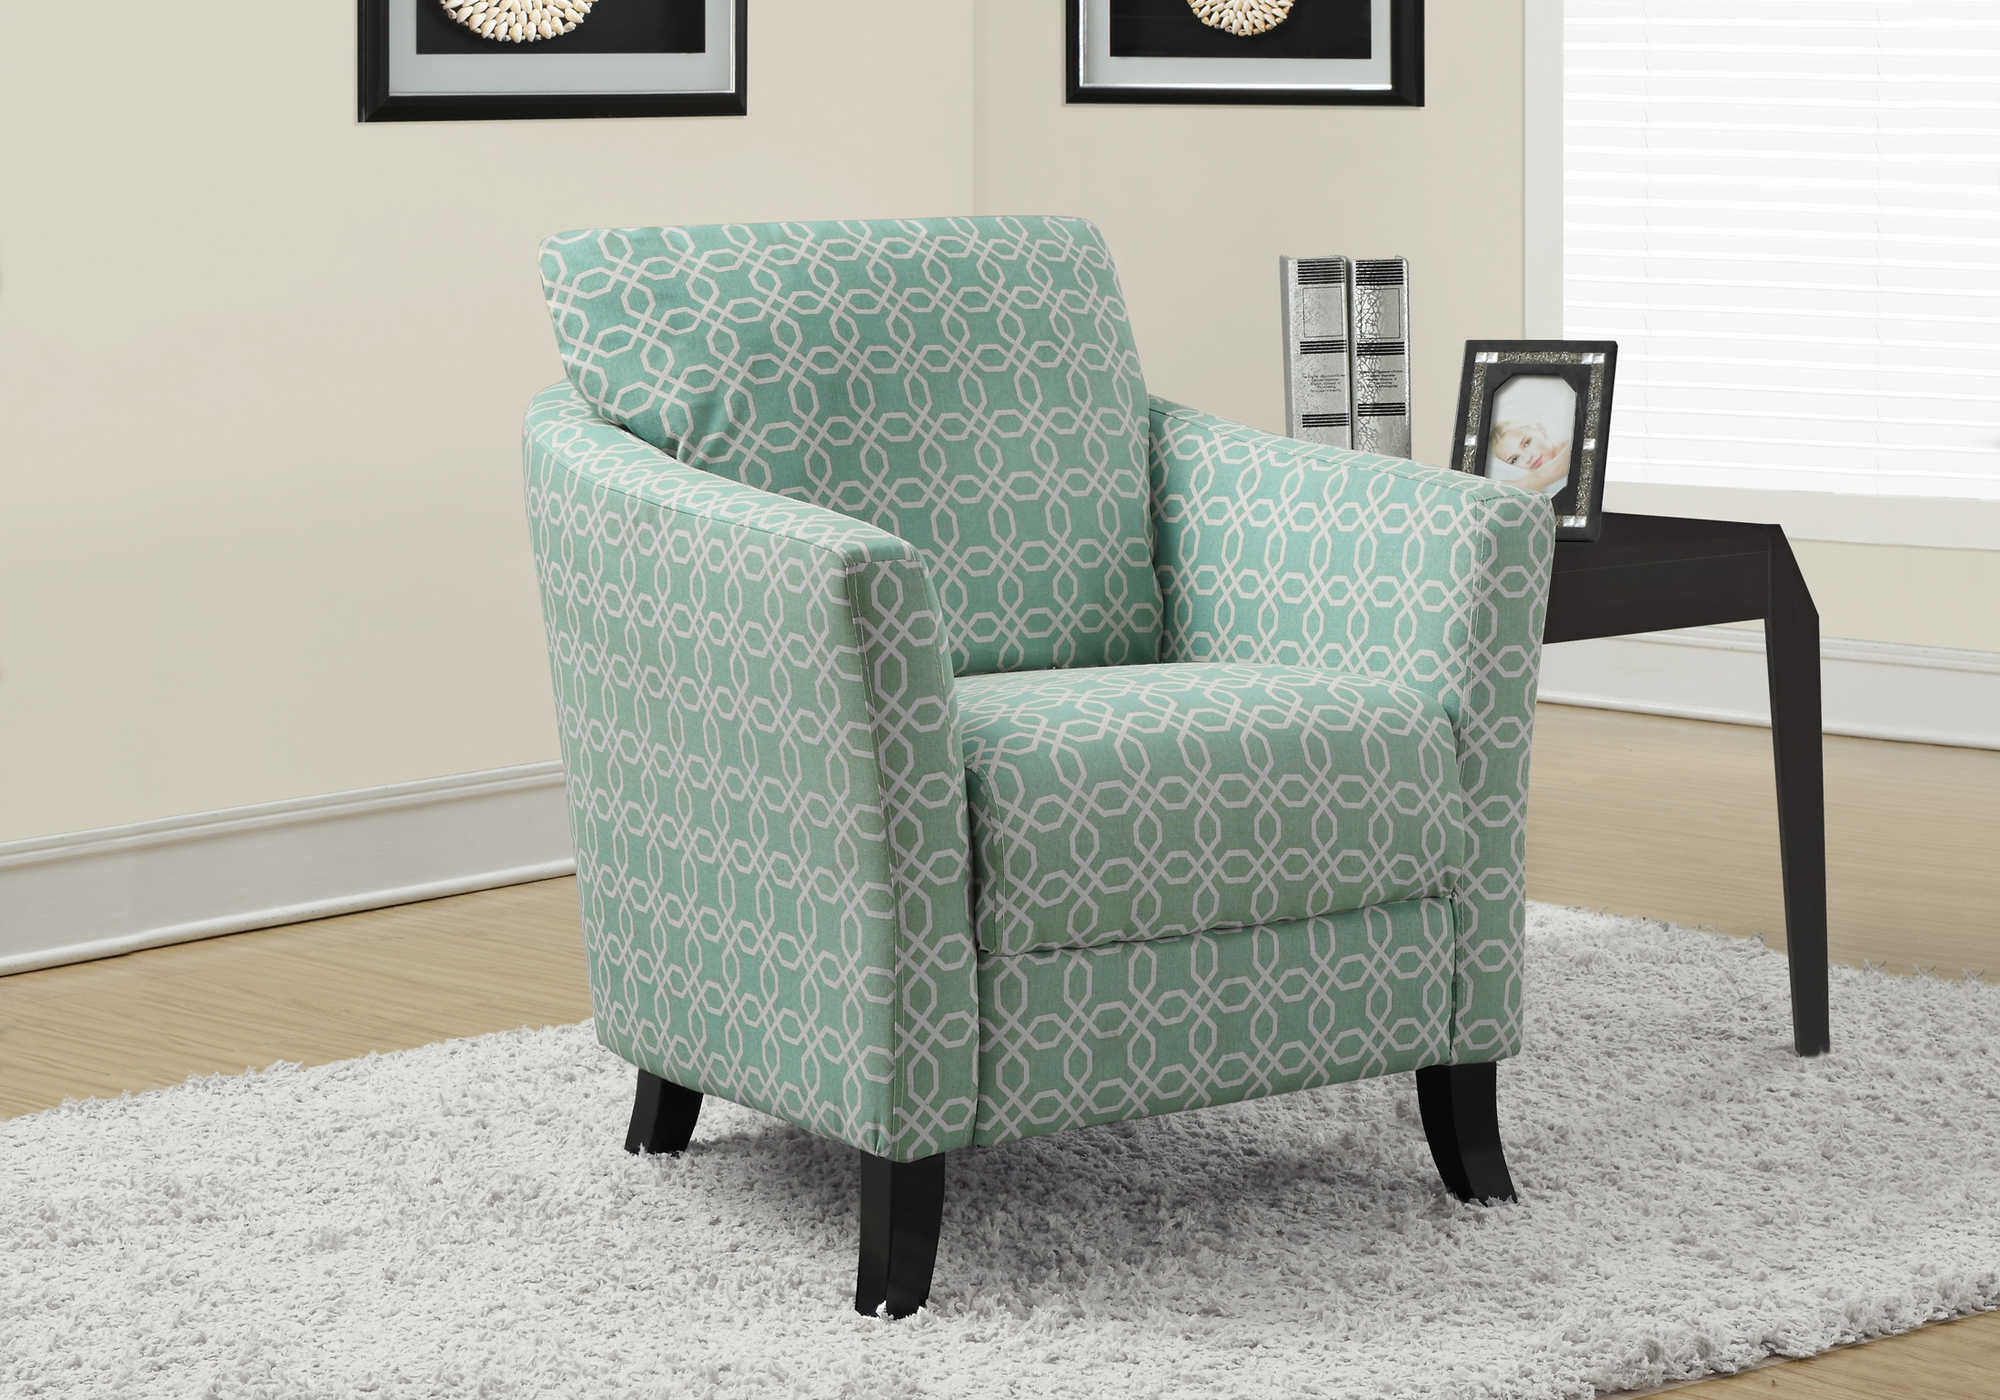 ACCENT CHAIR - FADED GREEN " ANGLED KALEIDOSCOPE " FABRIC